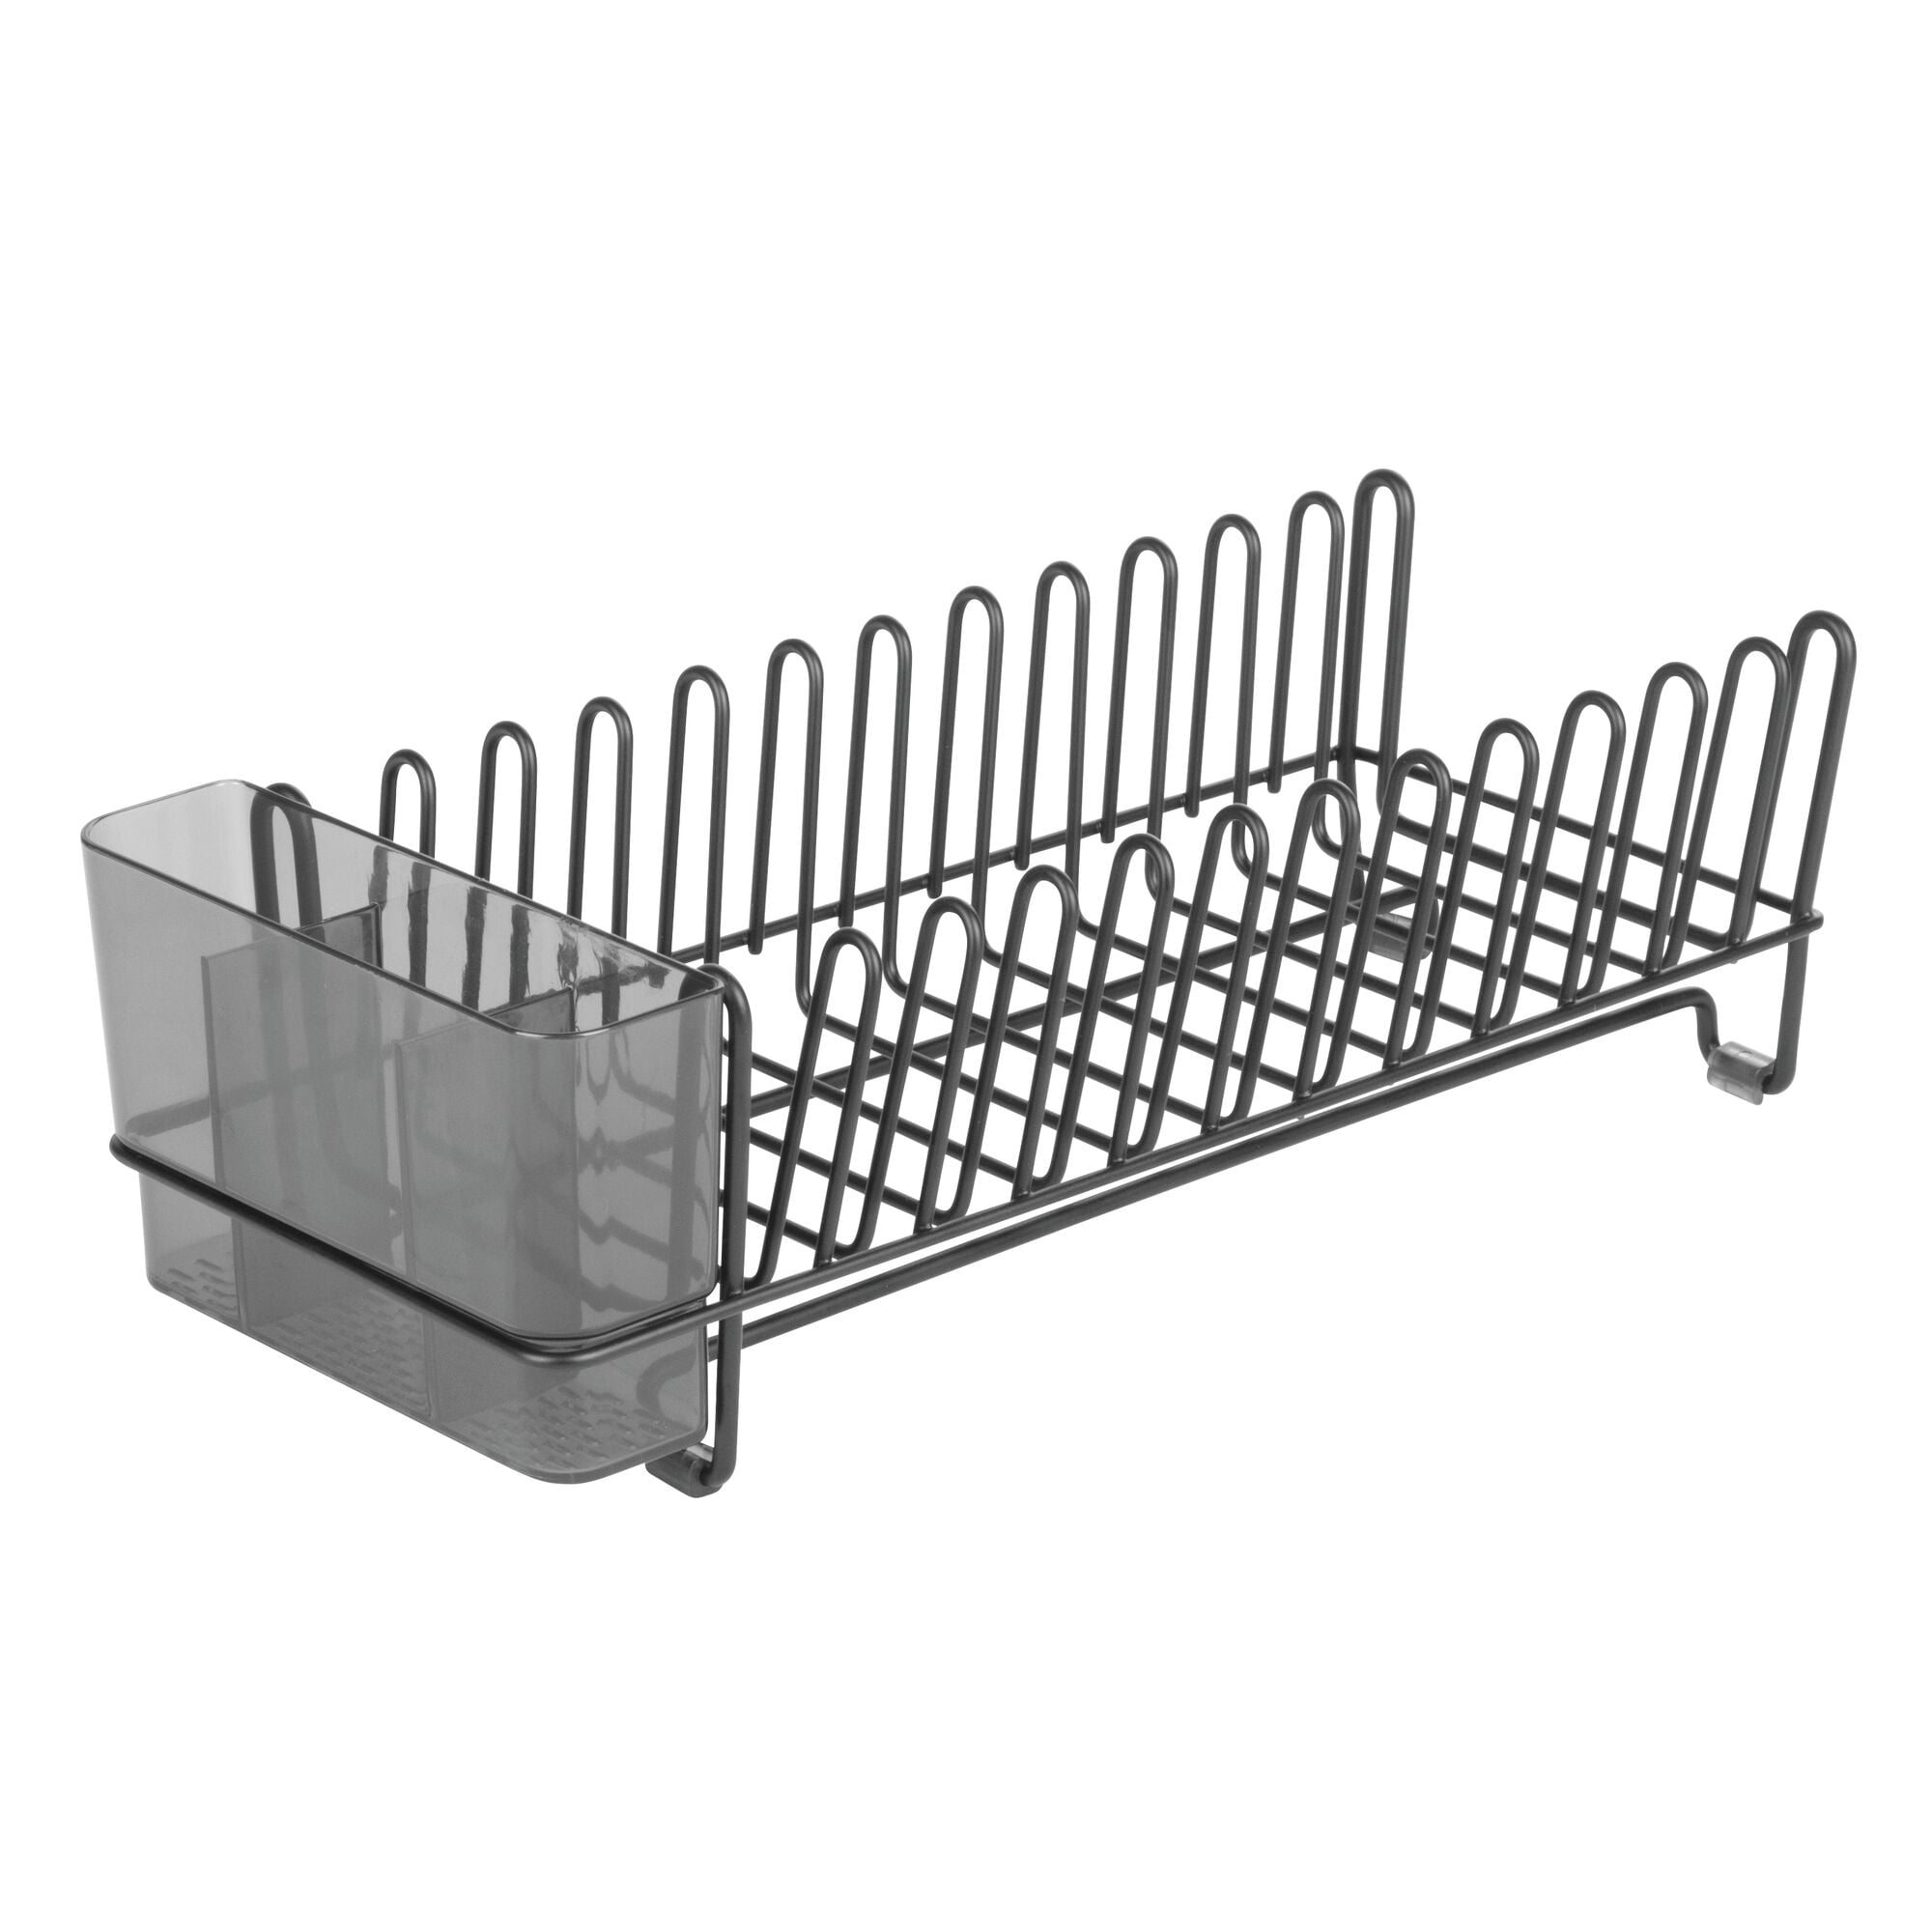 Kitchenaid Low Profile Powder Coated Dish Drying Rack in Charcoal Gray –  DaysMarketplace